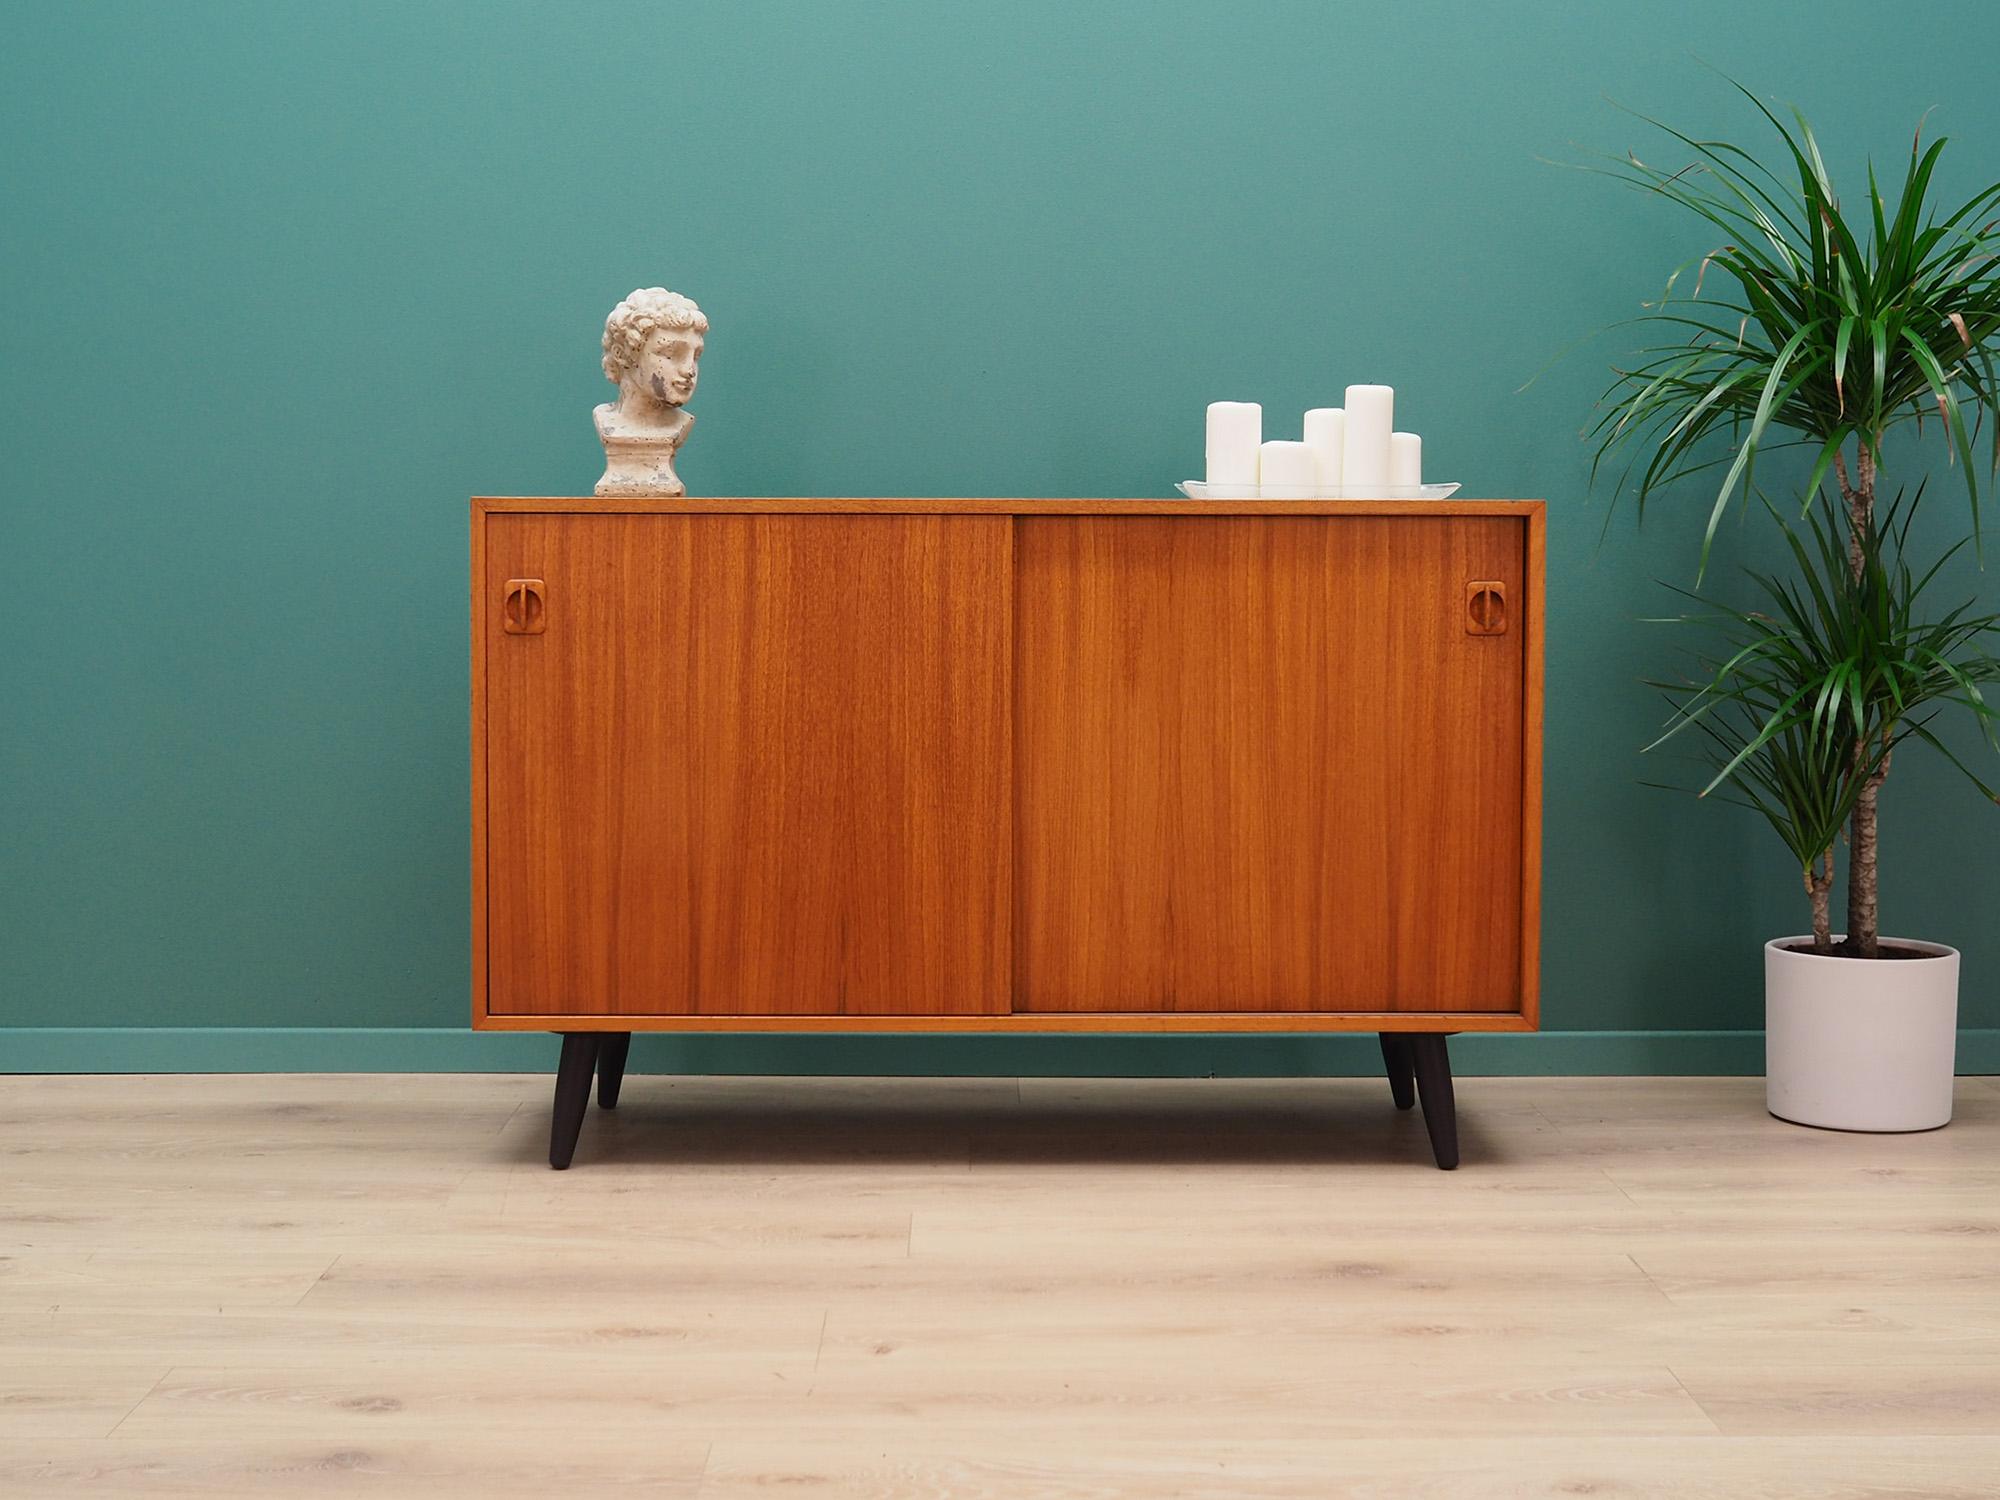 Fantastic cabinet from the 1960s-1970s. Scandinavian design, Minimalist form. Surface of the furniture finished with teak veneer. Cabinet has two shelves behind a sliding doors. Preserved in good condition (minor bruises and scratches, filled veneer